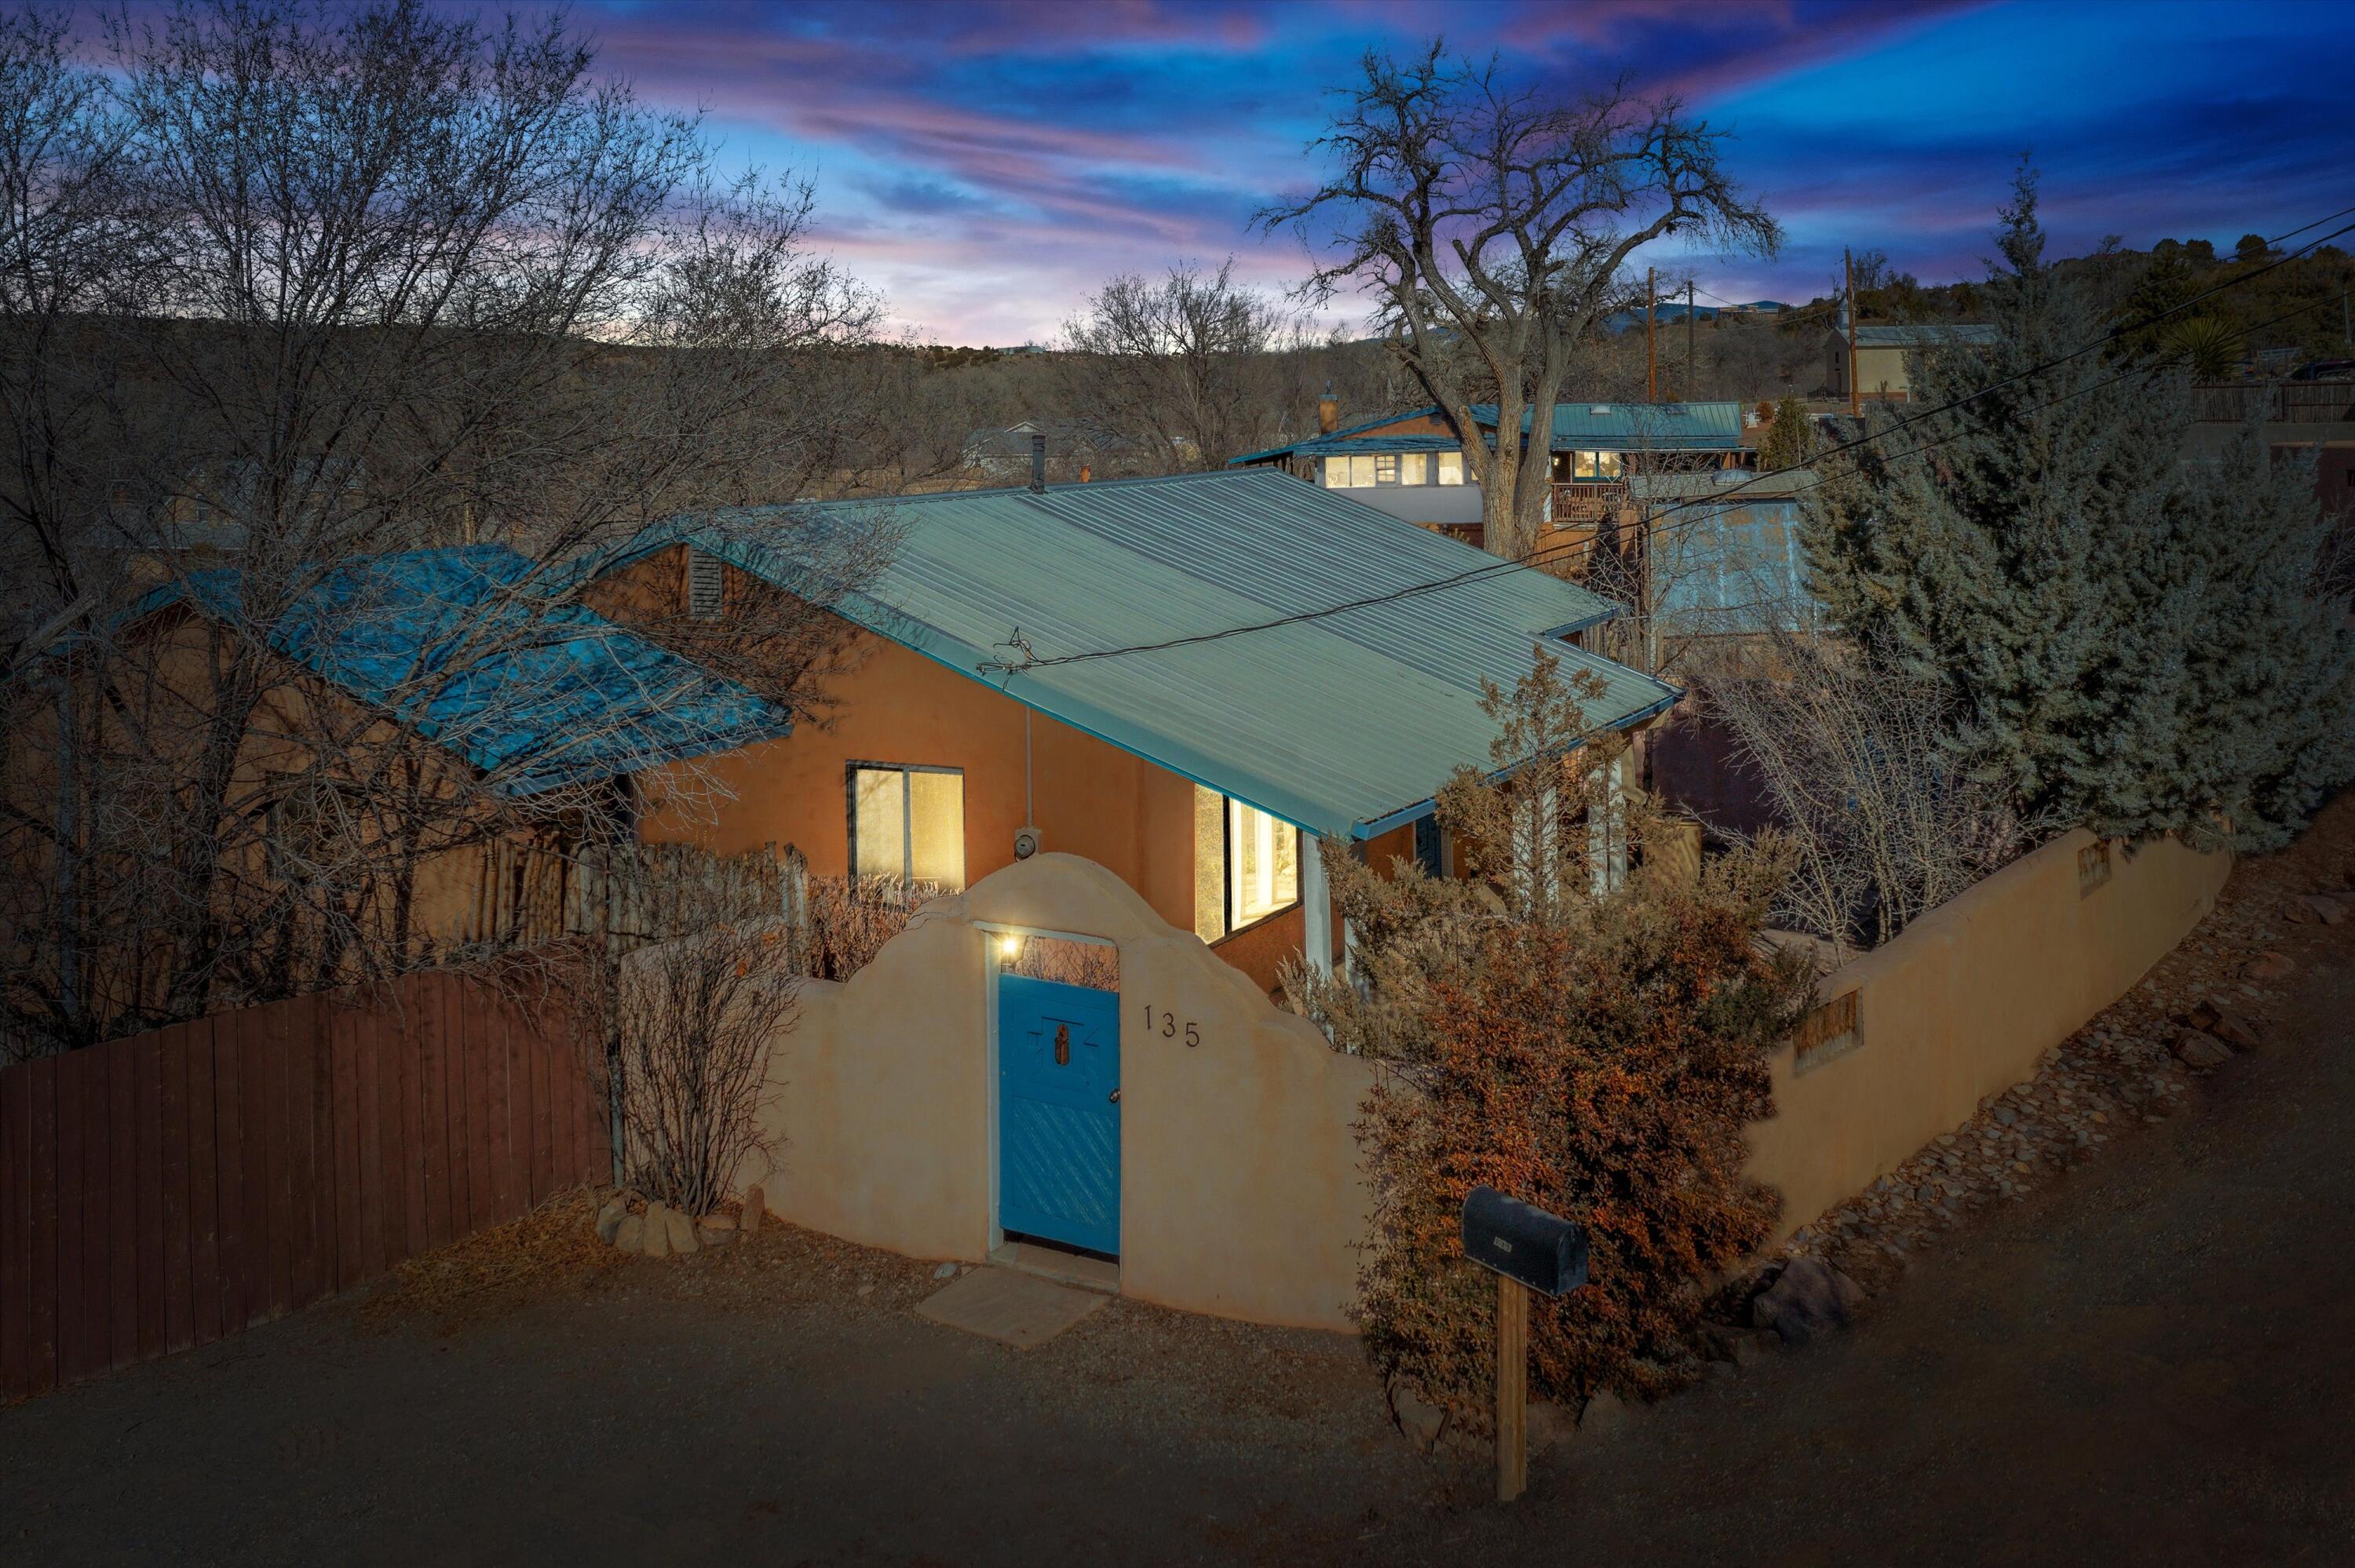 The spirit of New Mexico True in La Cienega. Flagstone patio to the large wooden deck, your choice for morning coffee or evening refreshments. Step inside to a sunny and bright home with original hardwood floors, modern kitchen and baths, & inviting views from every room. A Northern NM style home with metal roof ready to be adorned. Property is on community water, tankless H2O heater, baseboard radiant zoned heat with natural gas boiler. Beautiful appliance package including washer and dryer. Septic tank replaced in 2015 PLUS a stand up height basement-not incl. in sqft runs the full length of the house at an 8' width. Very usable space that can be finished out to be a workshop or hobby space. 30 MIN to Abq. or LA. The Plaza 15 min. Only 5 minutes from Ojo Santa Fe Spa. Now this is living!